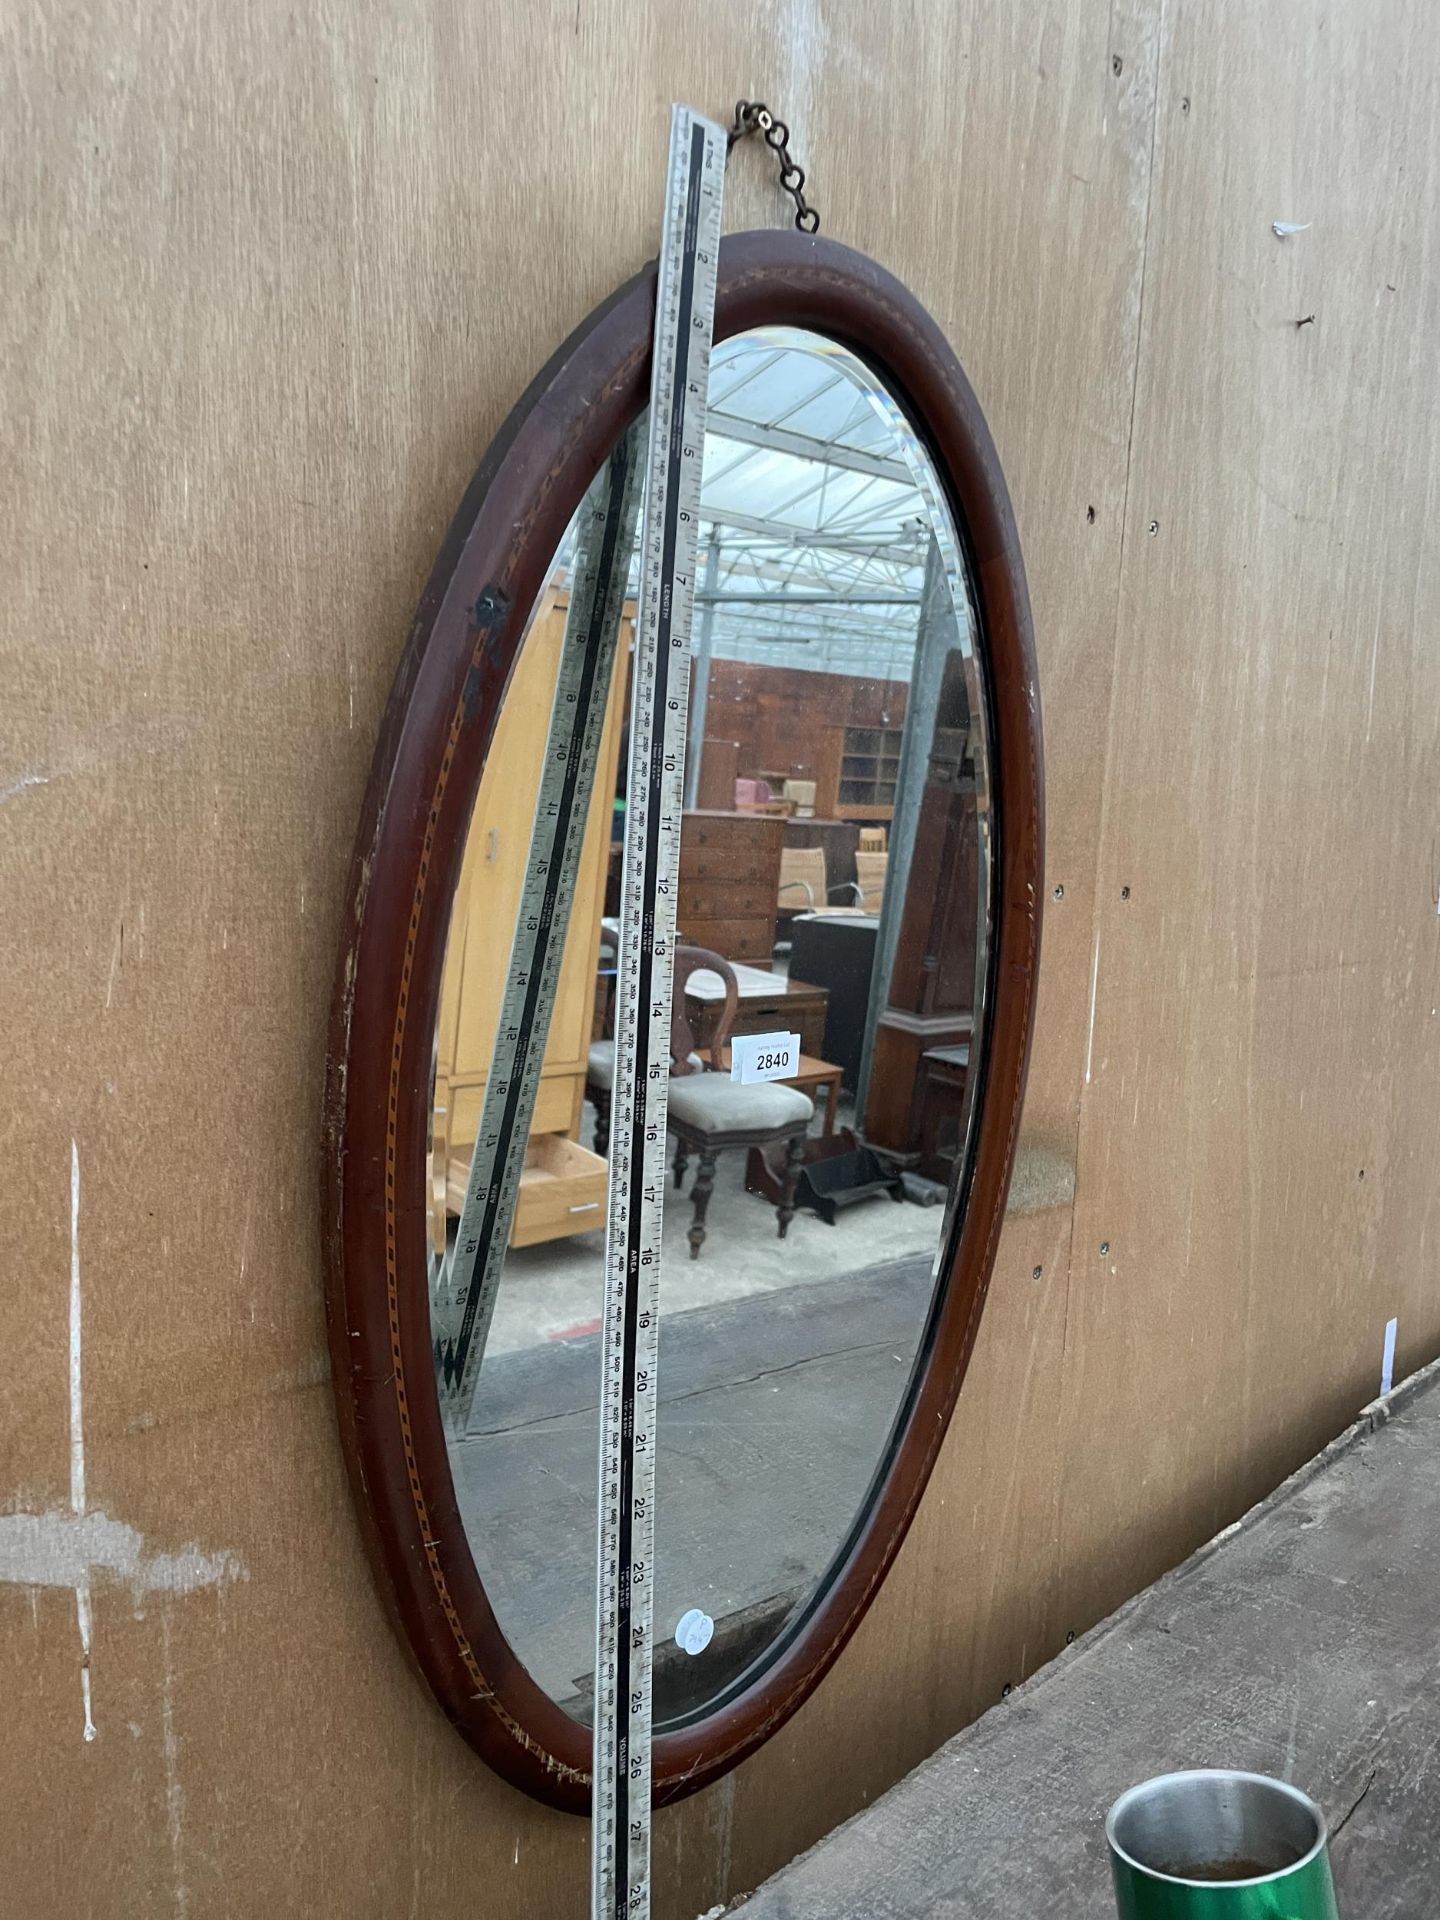 AN OVAL MAHOGANY AND INLAID EDWARDIAN MIRROR - Image 3 of 3